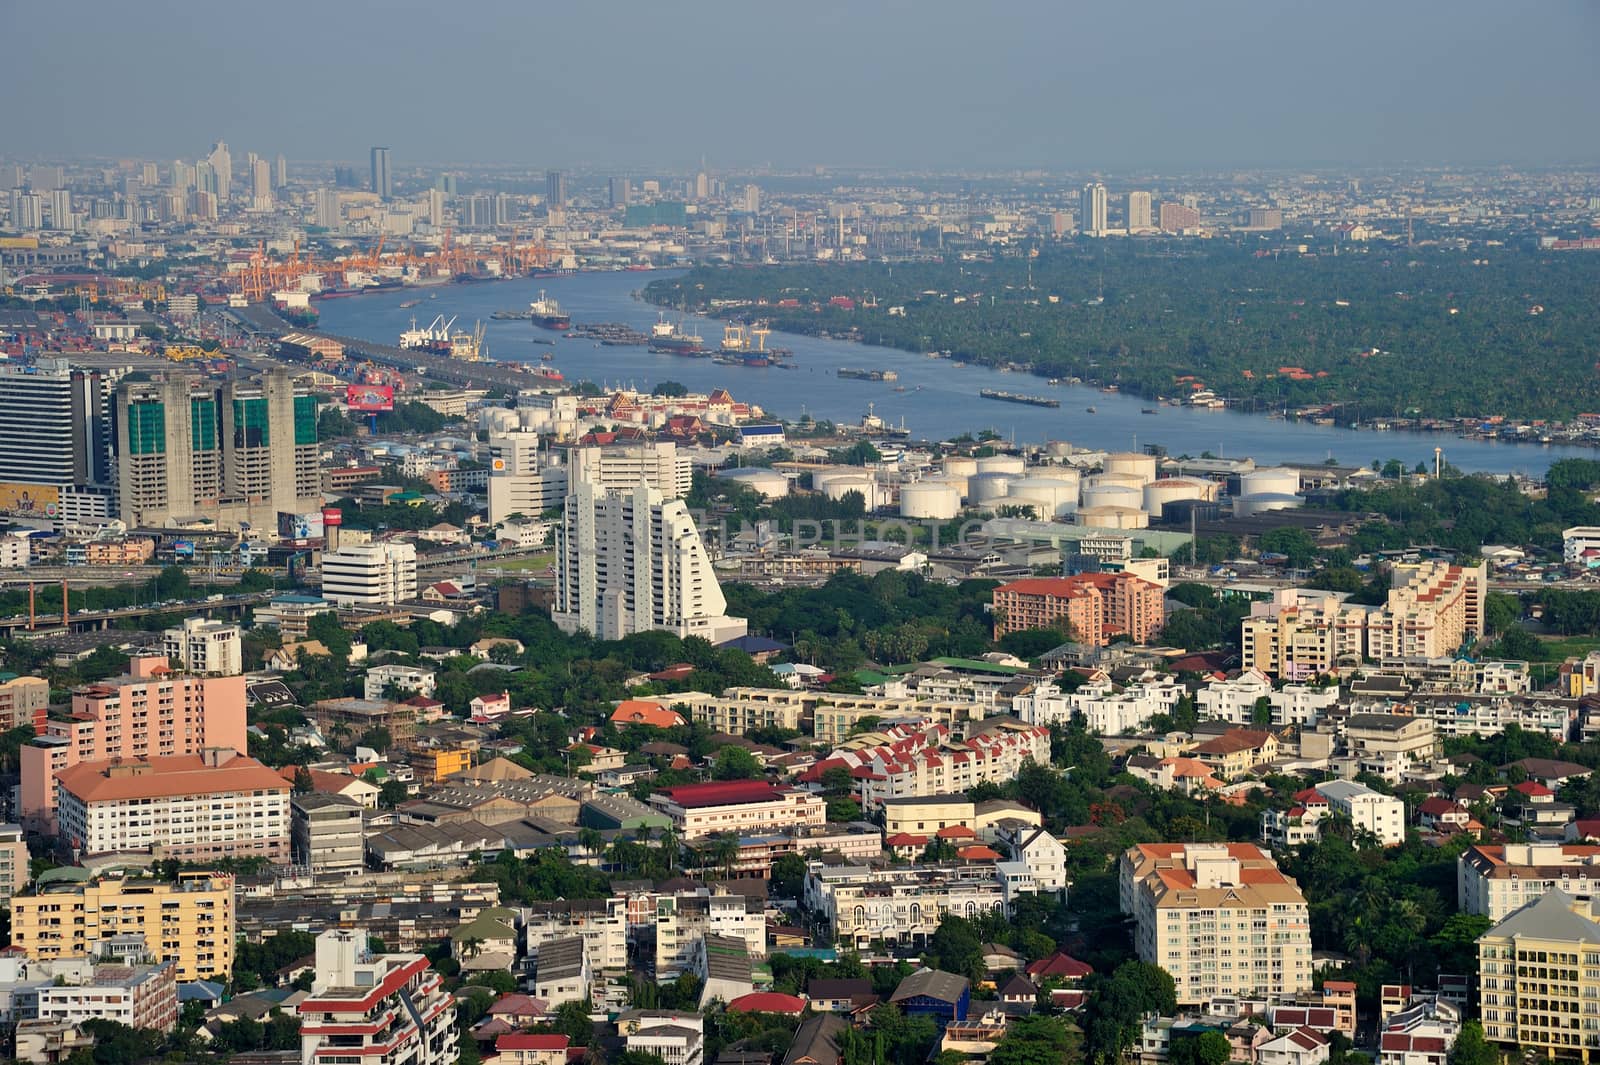 Bangkok city and Chaophraya River from bird's-eye view in evening.